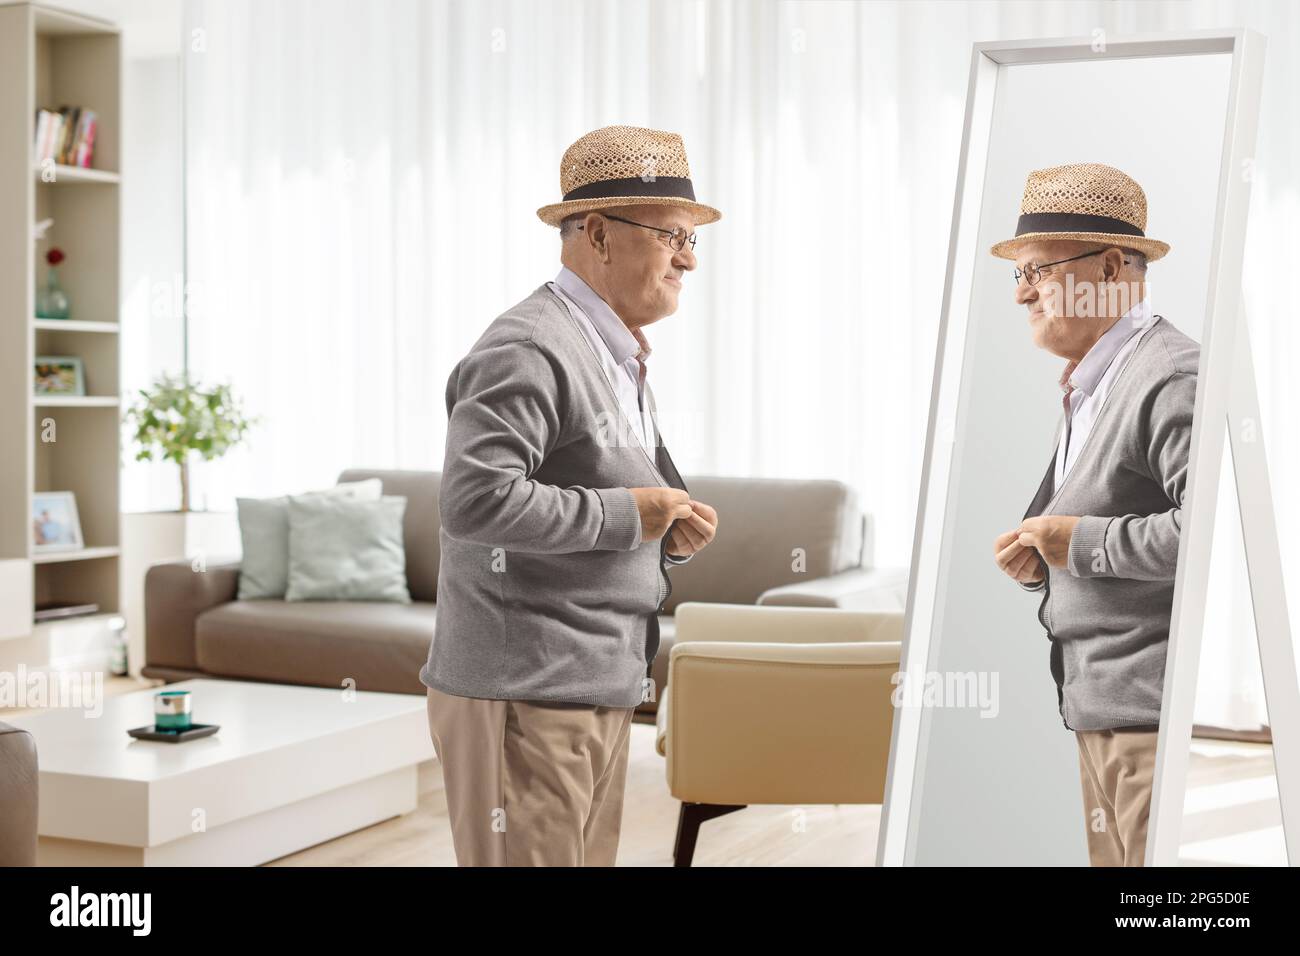 Elderly man getting dressed in front of a mirror at home Stock Photo